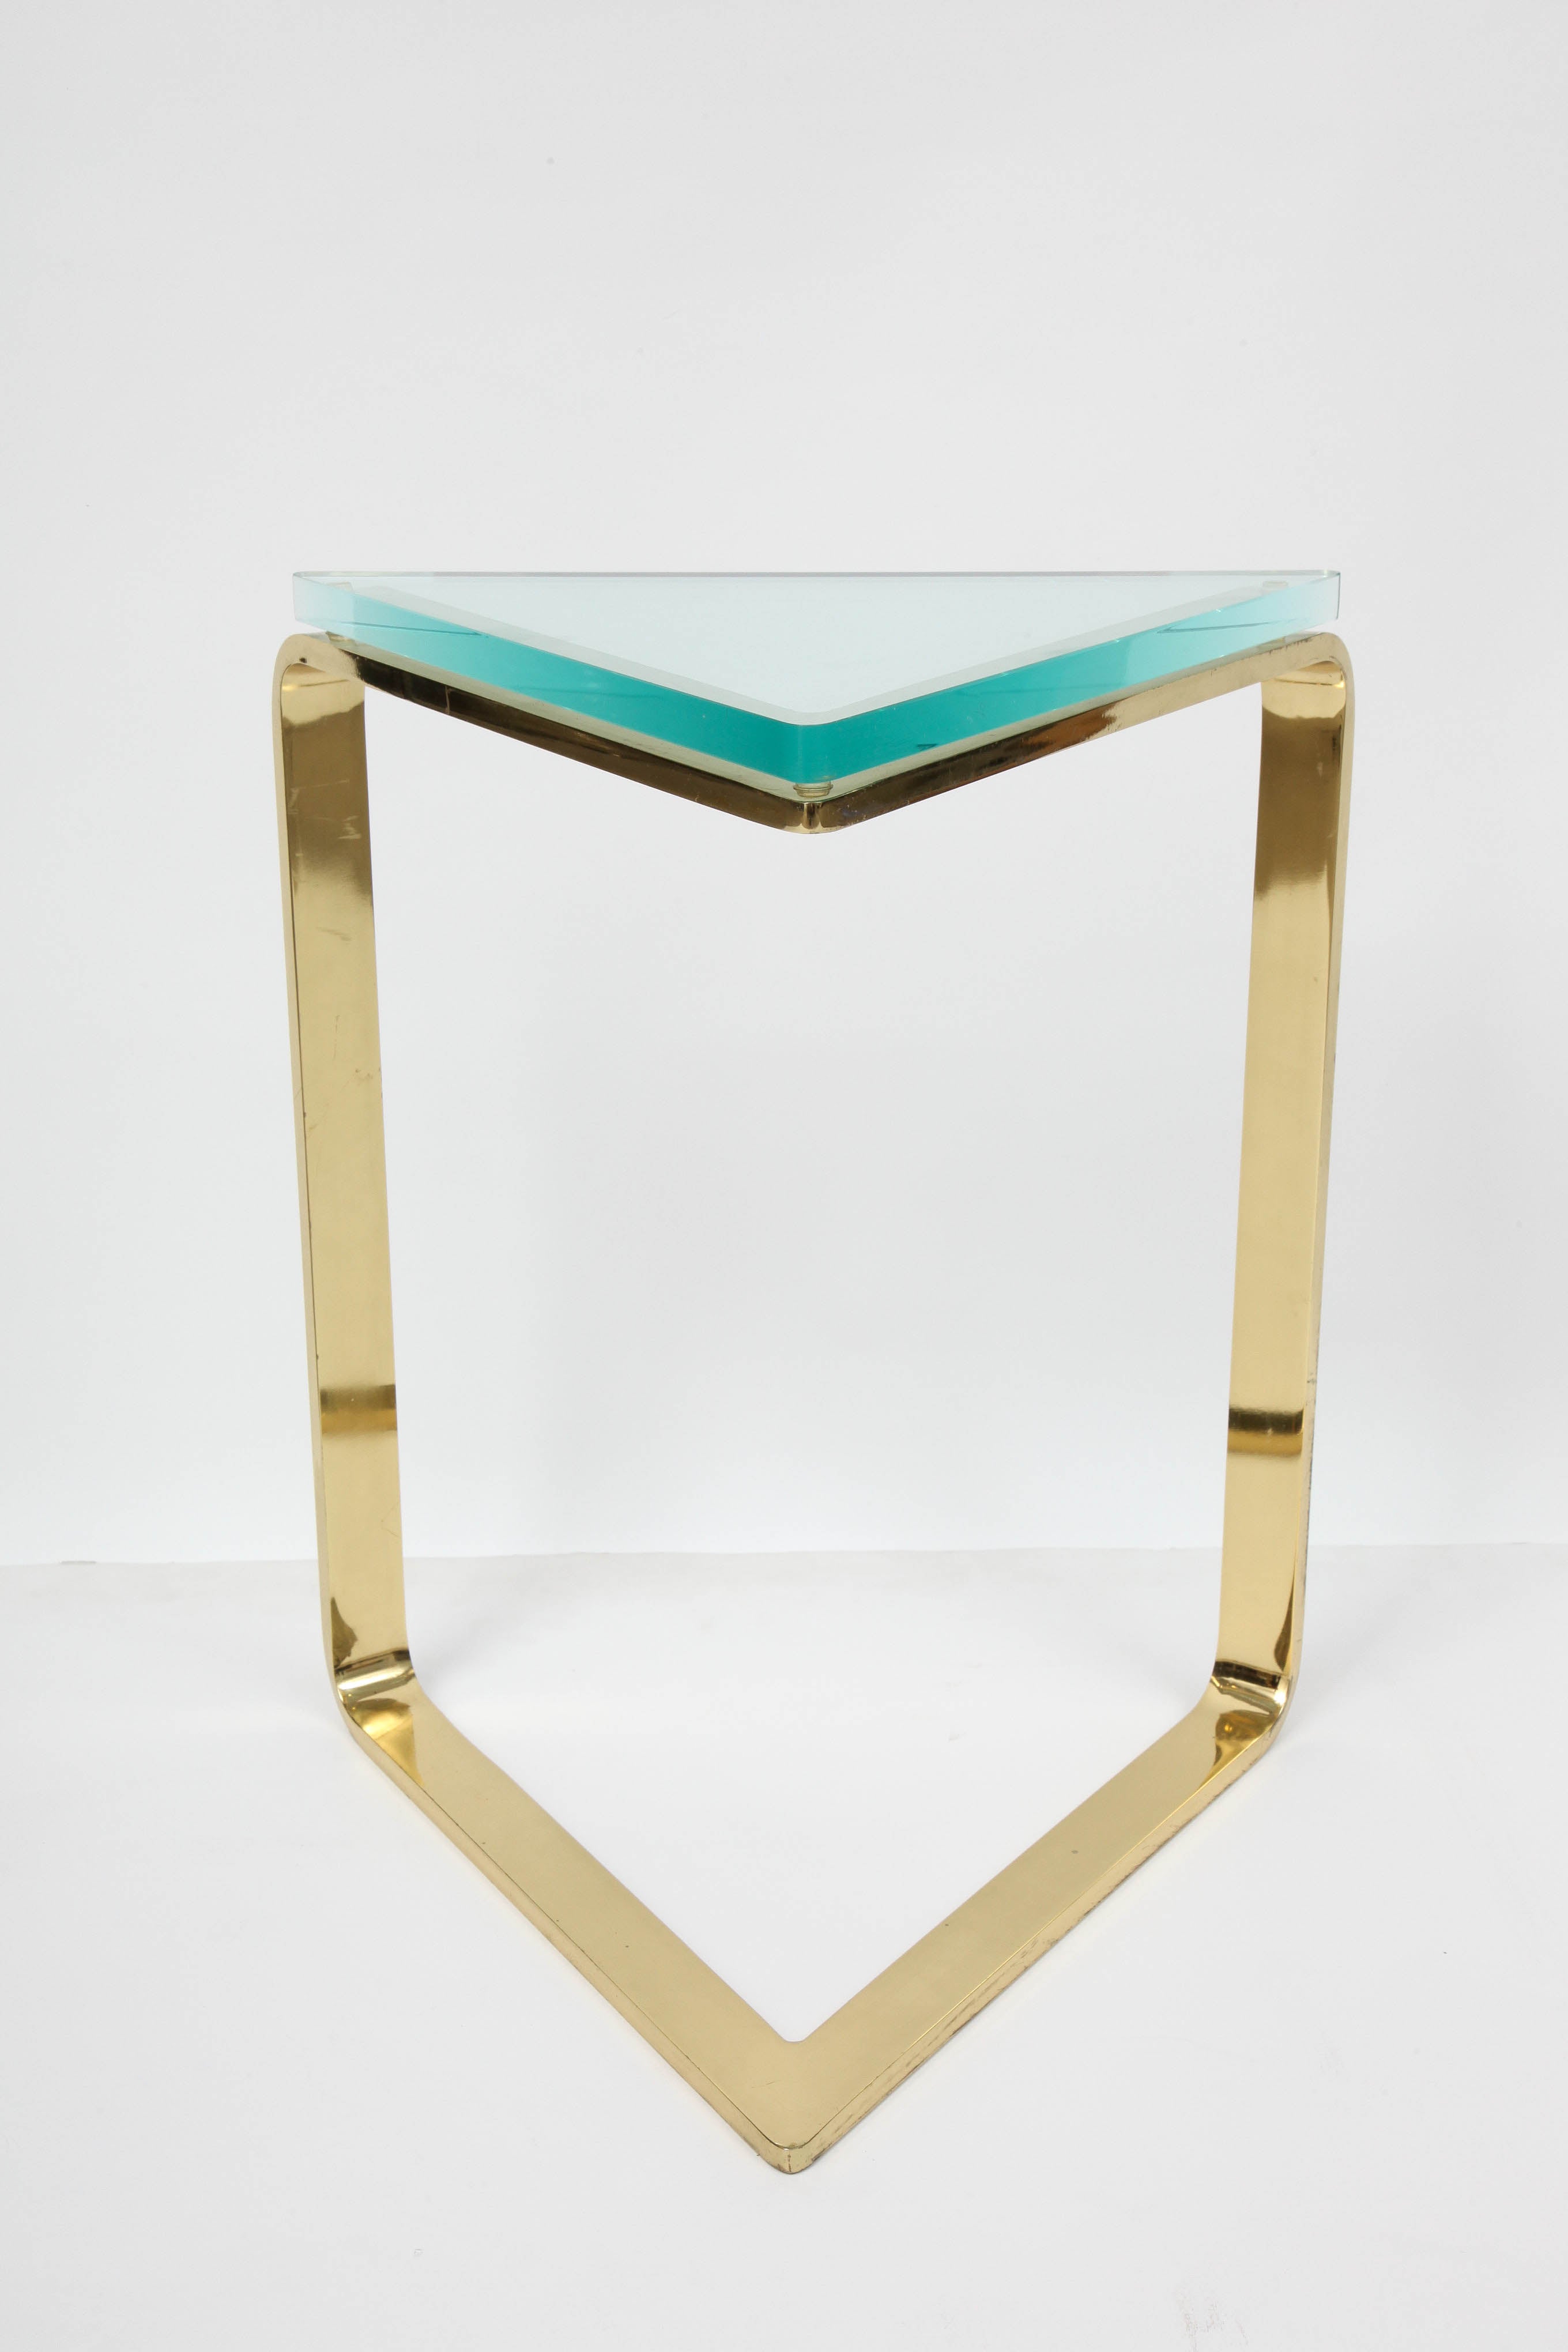 Brass Triangle Table by Pace